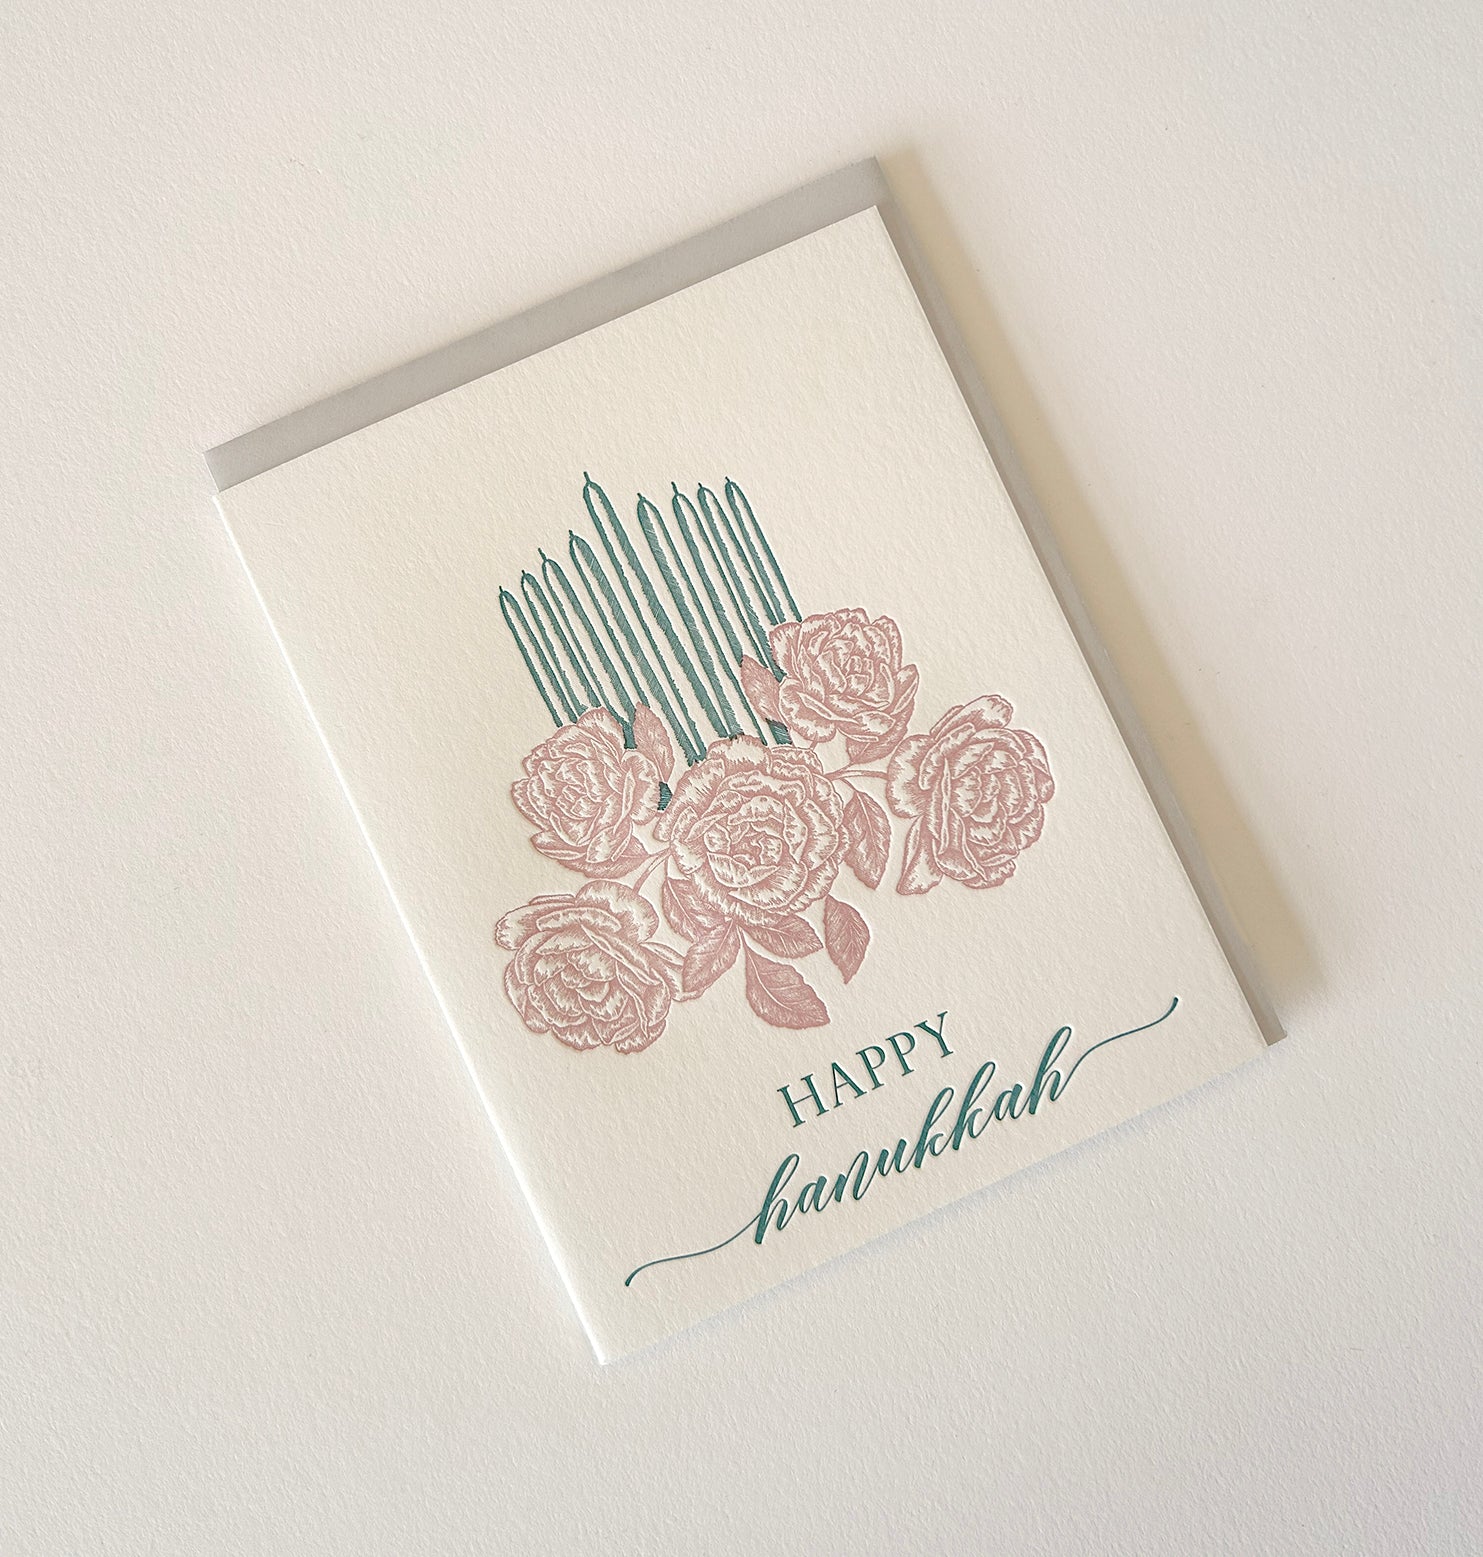 Letterpress holiday card with florals and candles that says "Happy Hanukkah" by Rust Belt Love